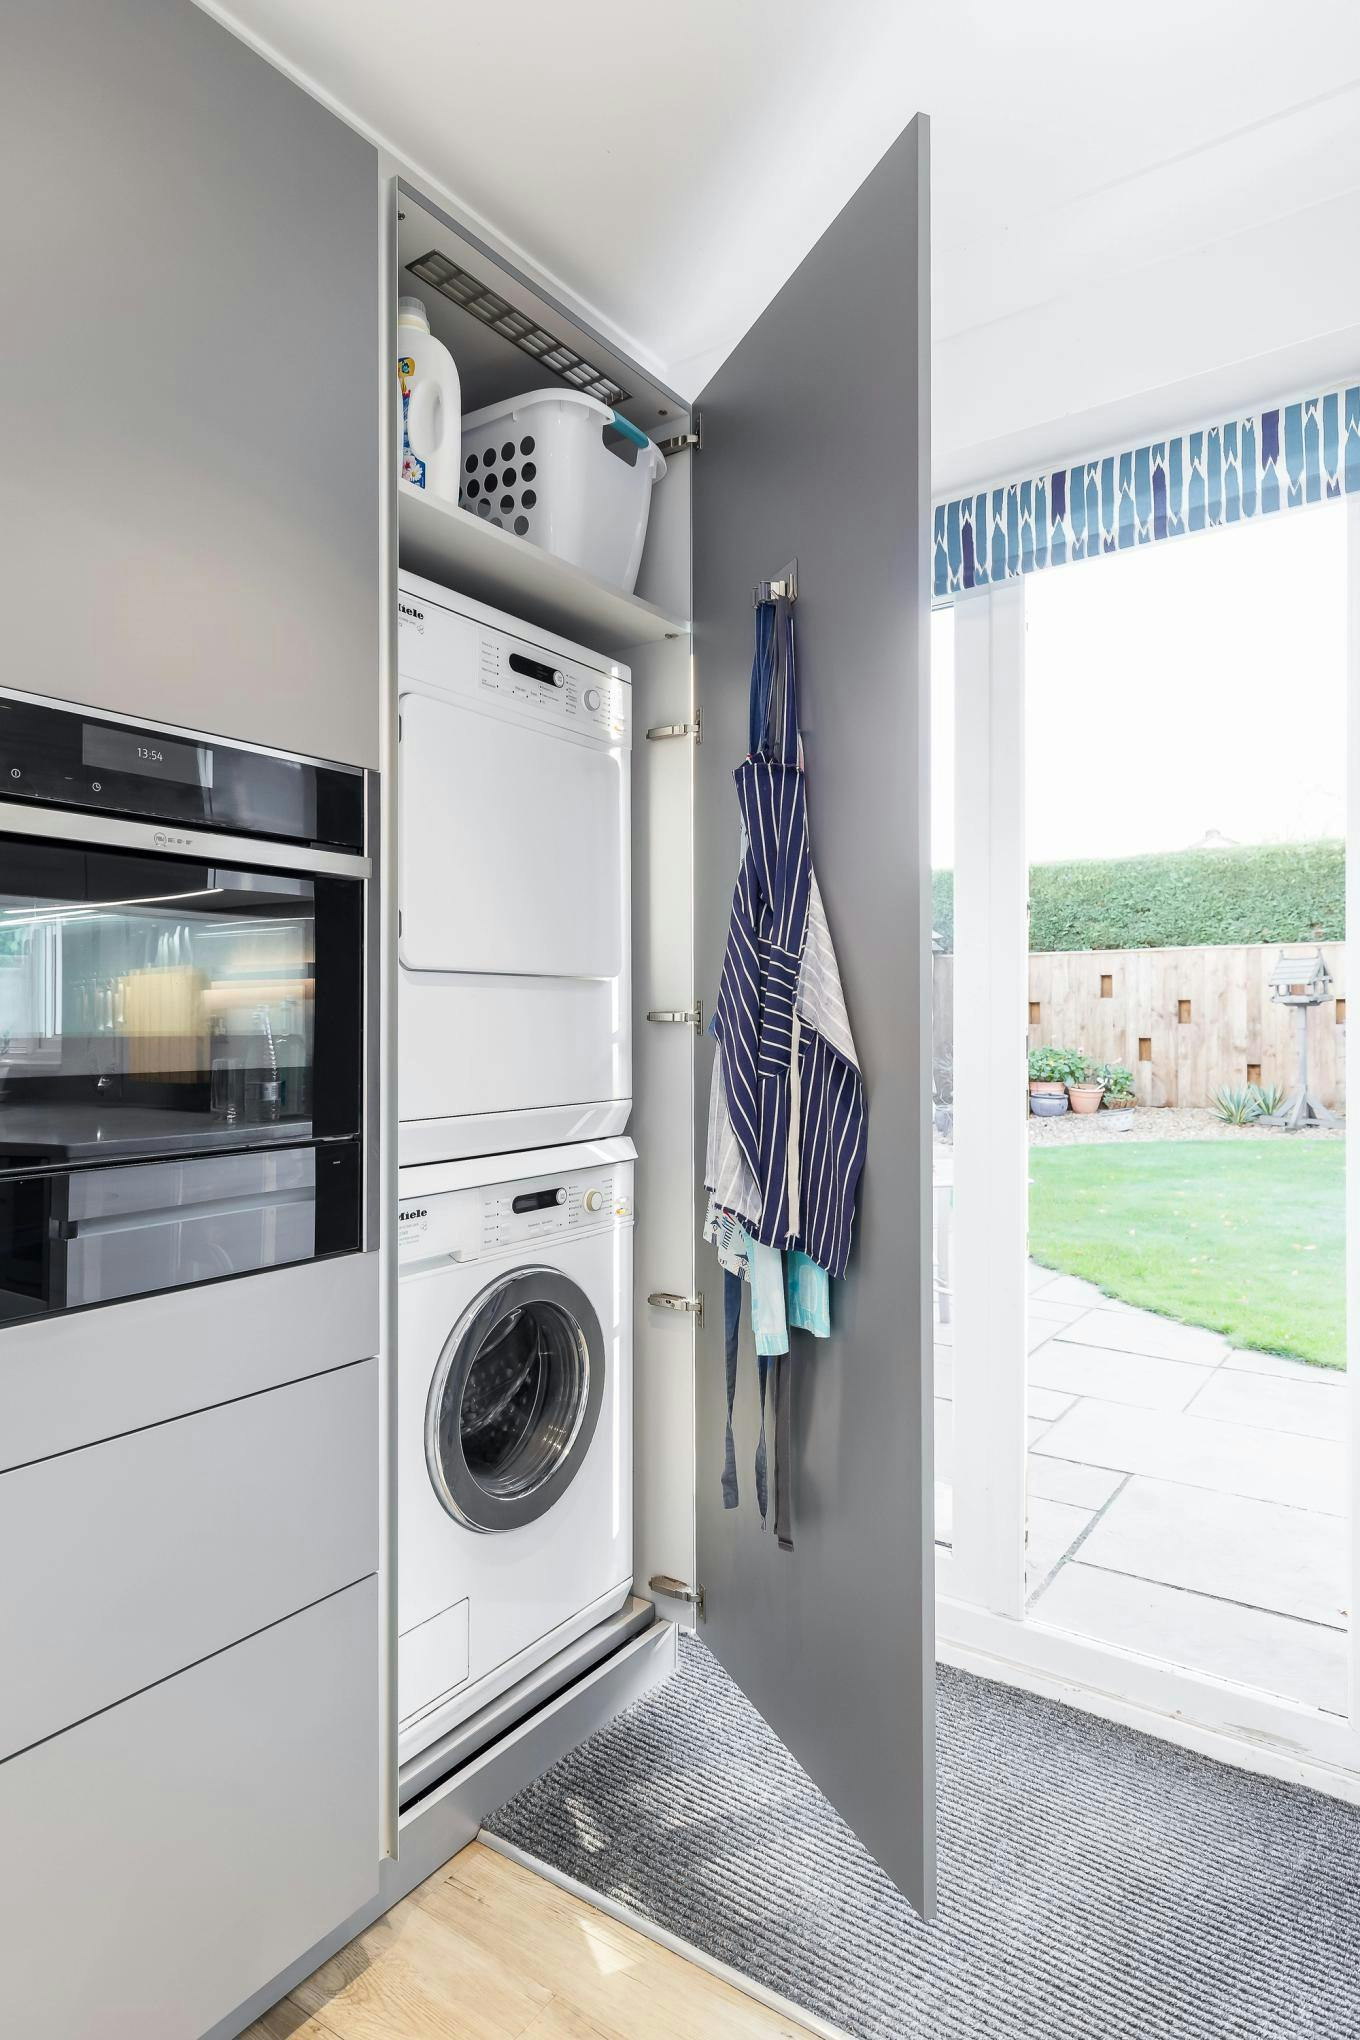 Stacked washing machine and tumble dryer concealed behind door